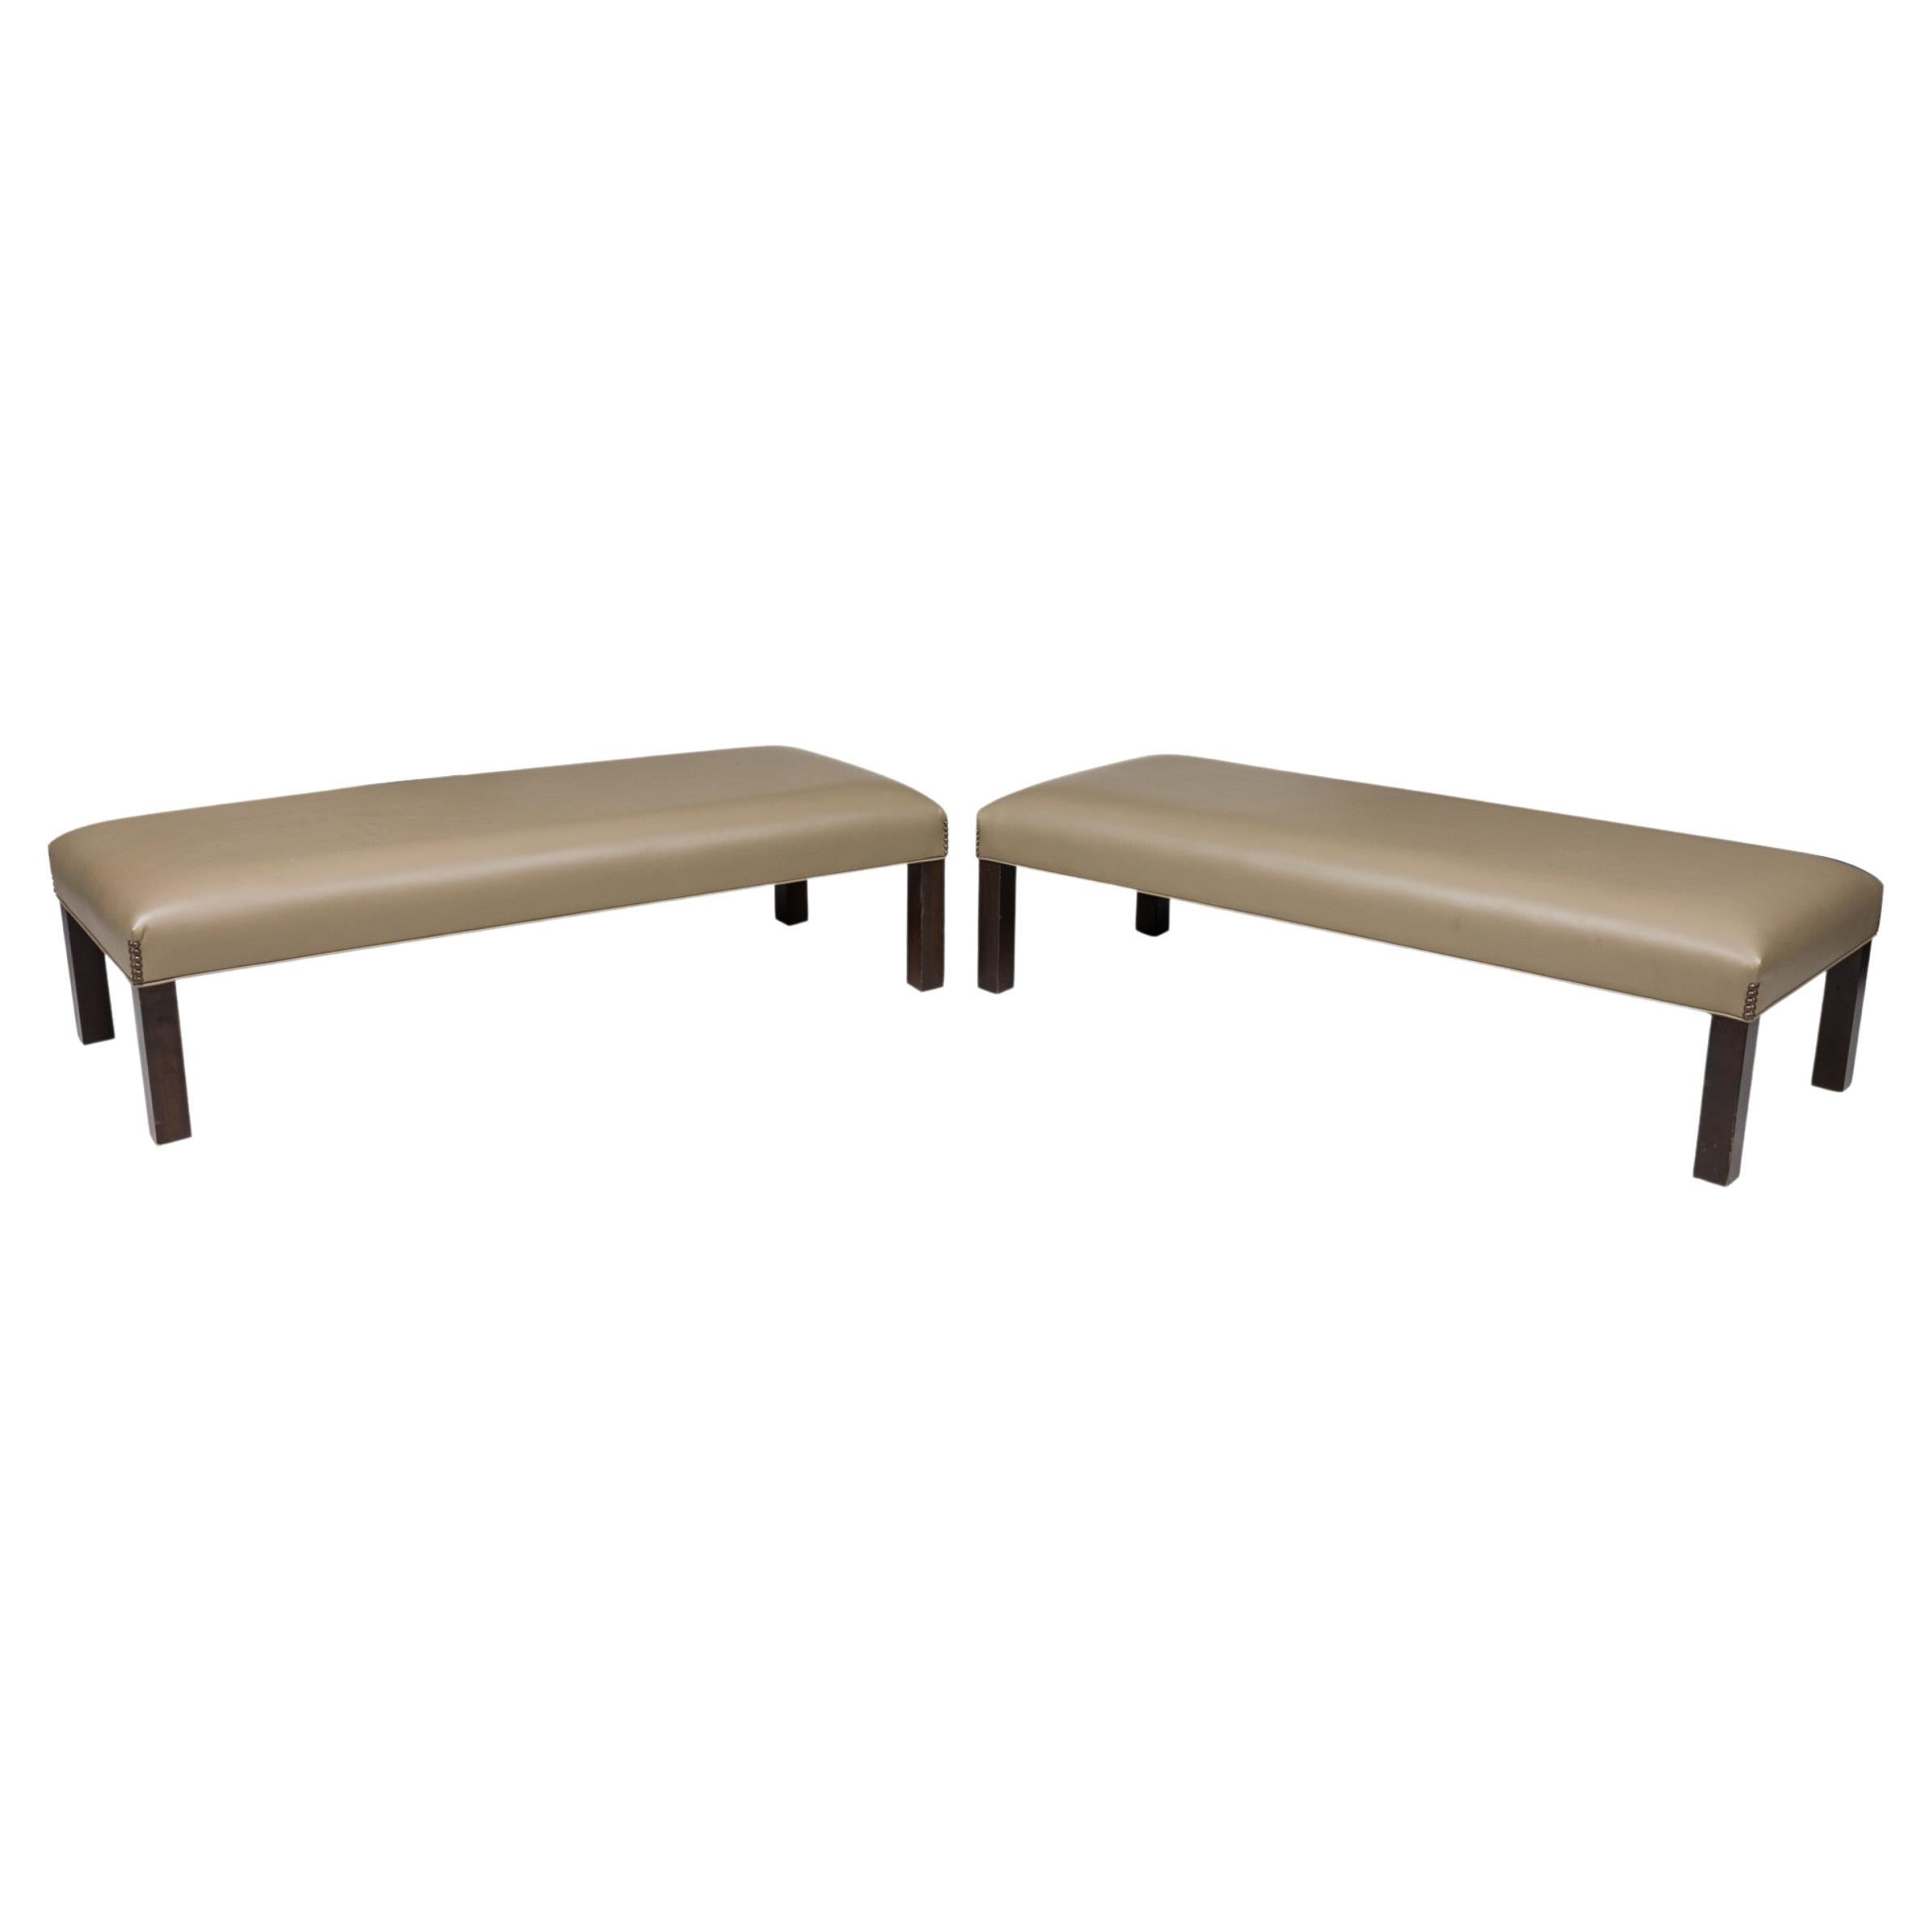 Pair of Contemporary Taupe Leather Upholstered Benches